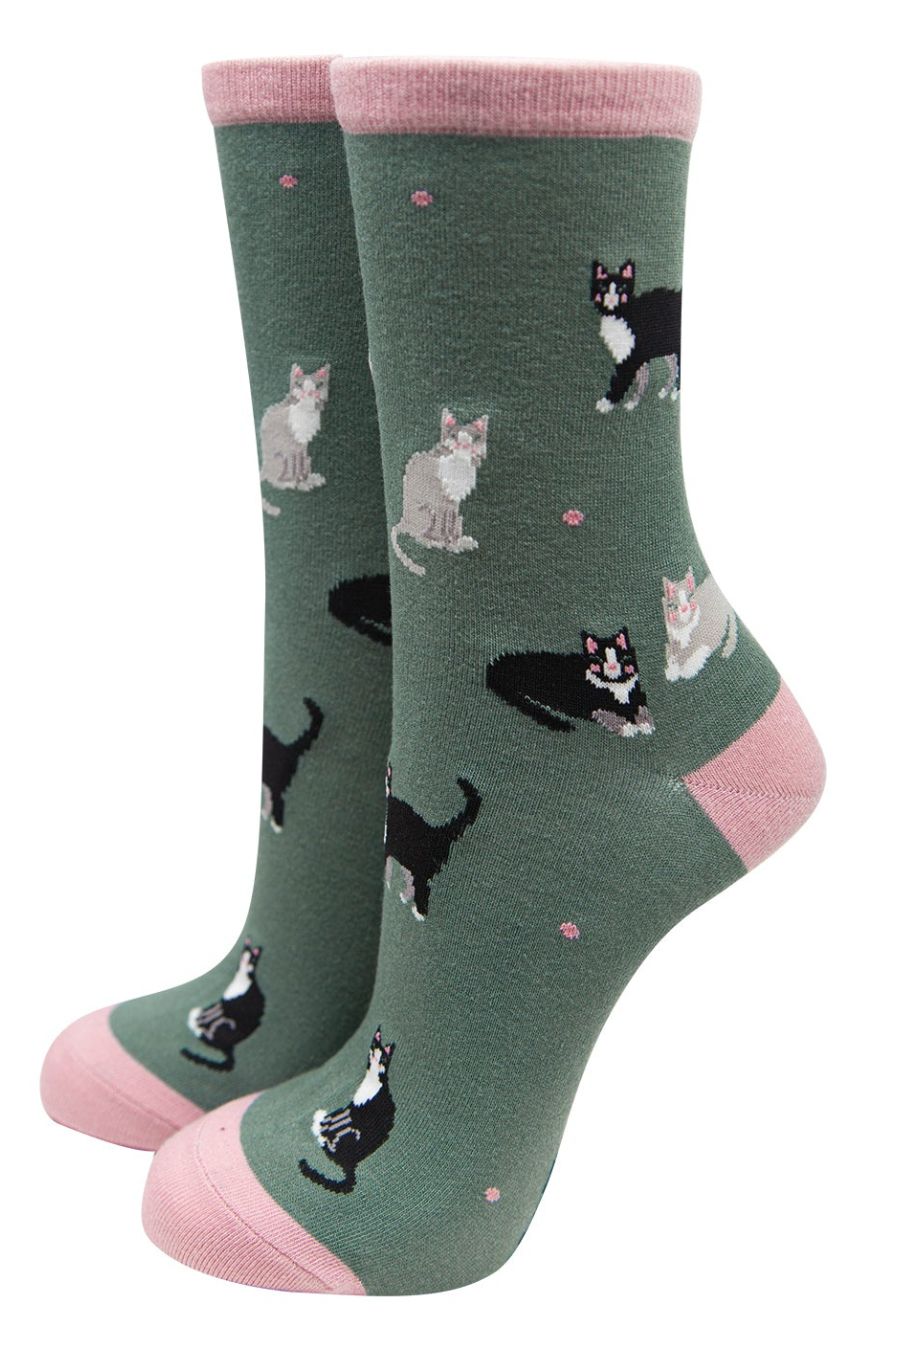 sage green and pink bamboo ankle socks with grey and black cats